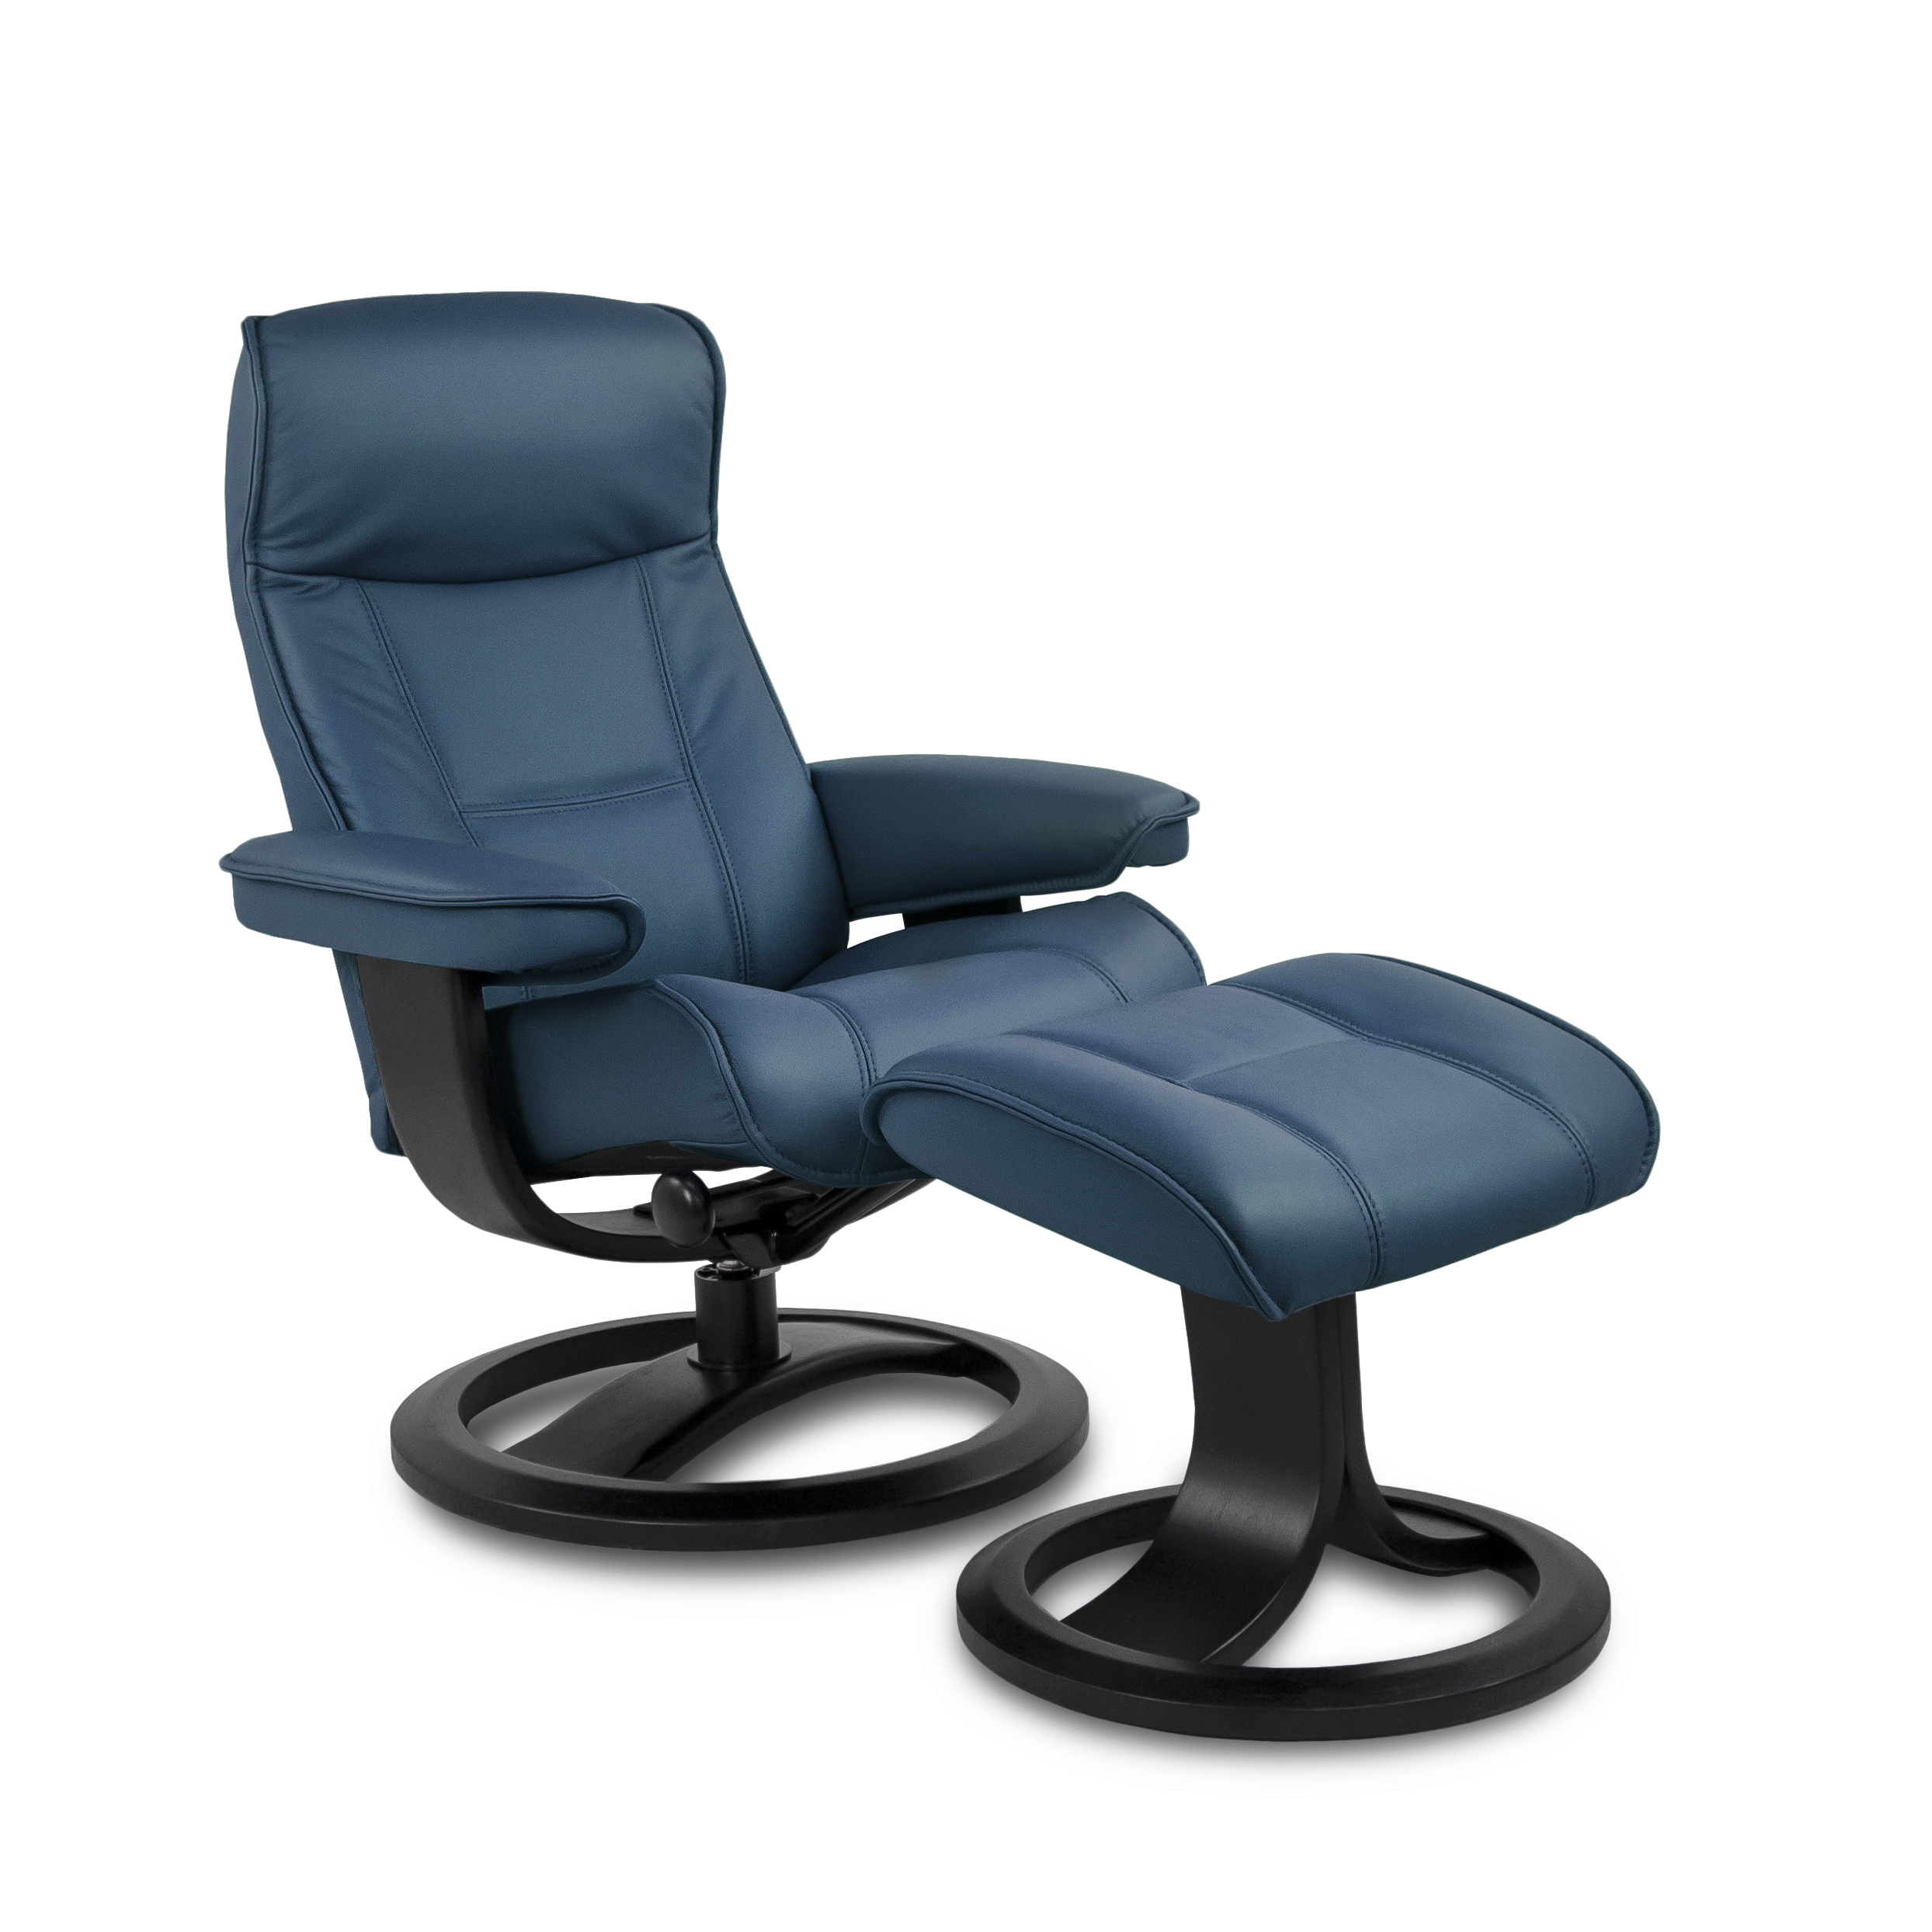 Img Nordic 21 Leather Recliner, Swivel Leather Recliners